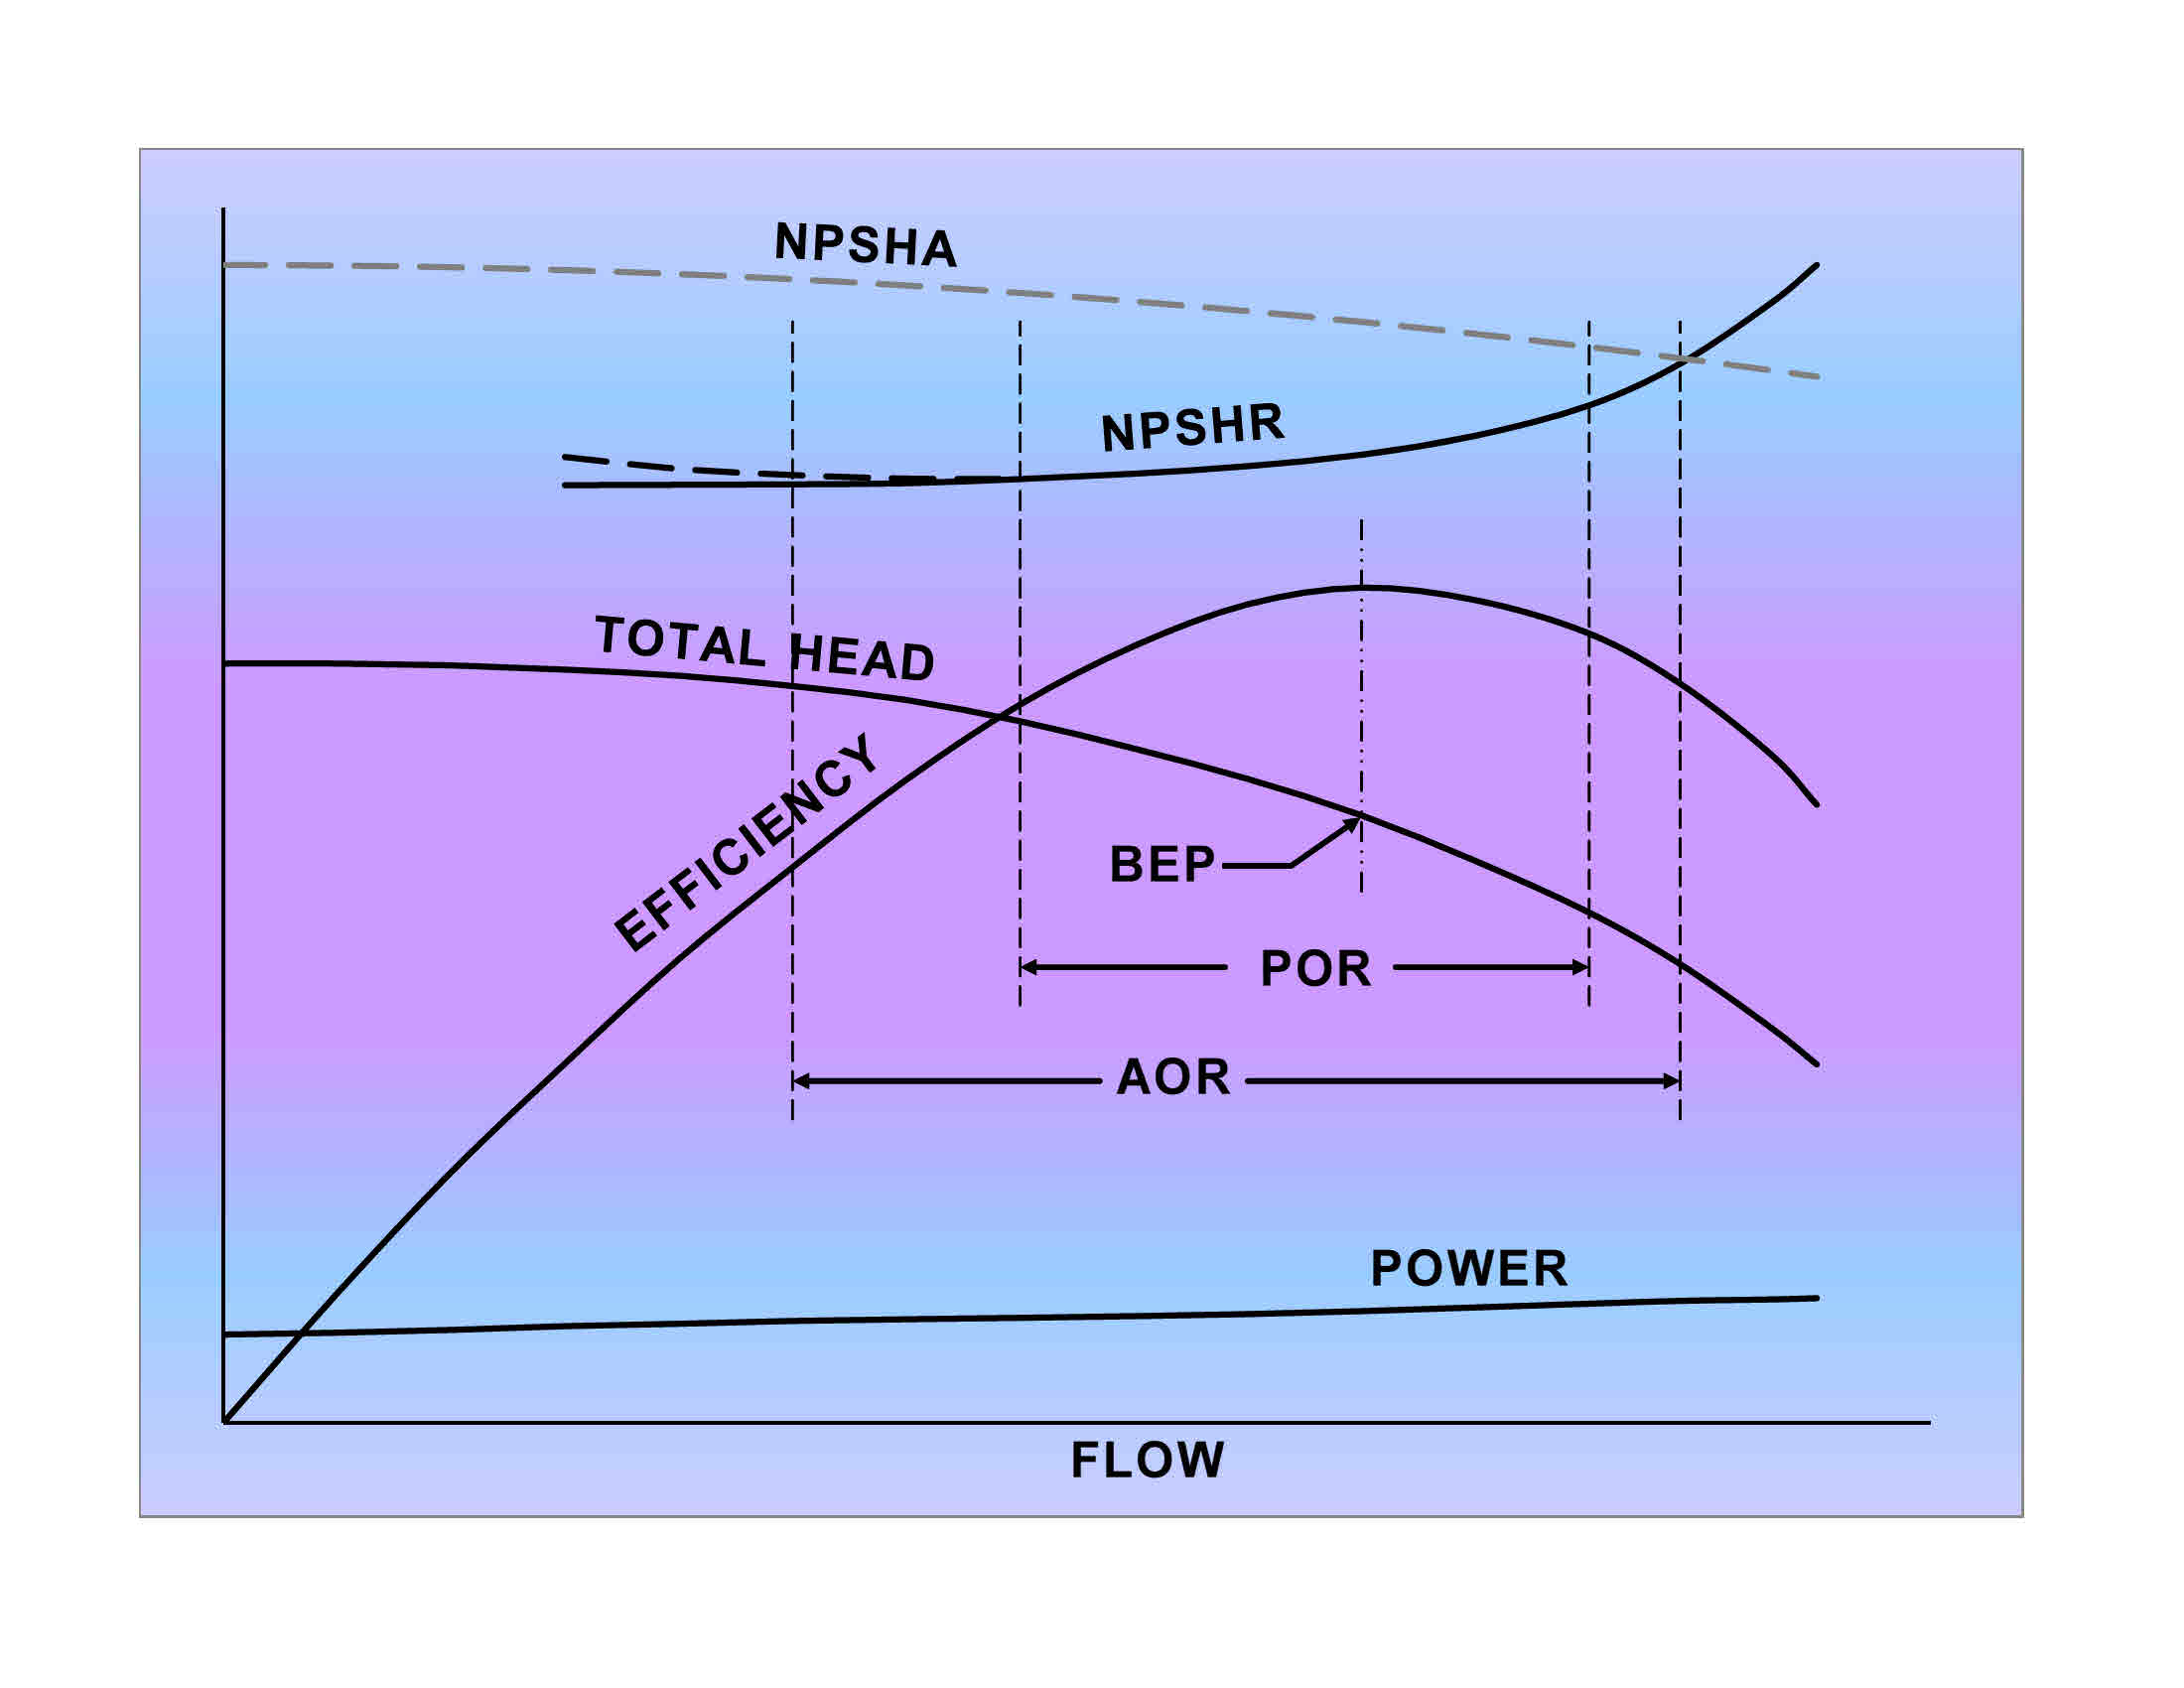 Rated Power Calculation for Centrifugal Pumps - API 610